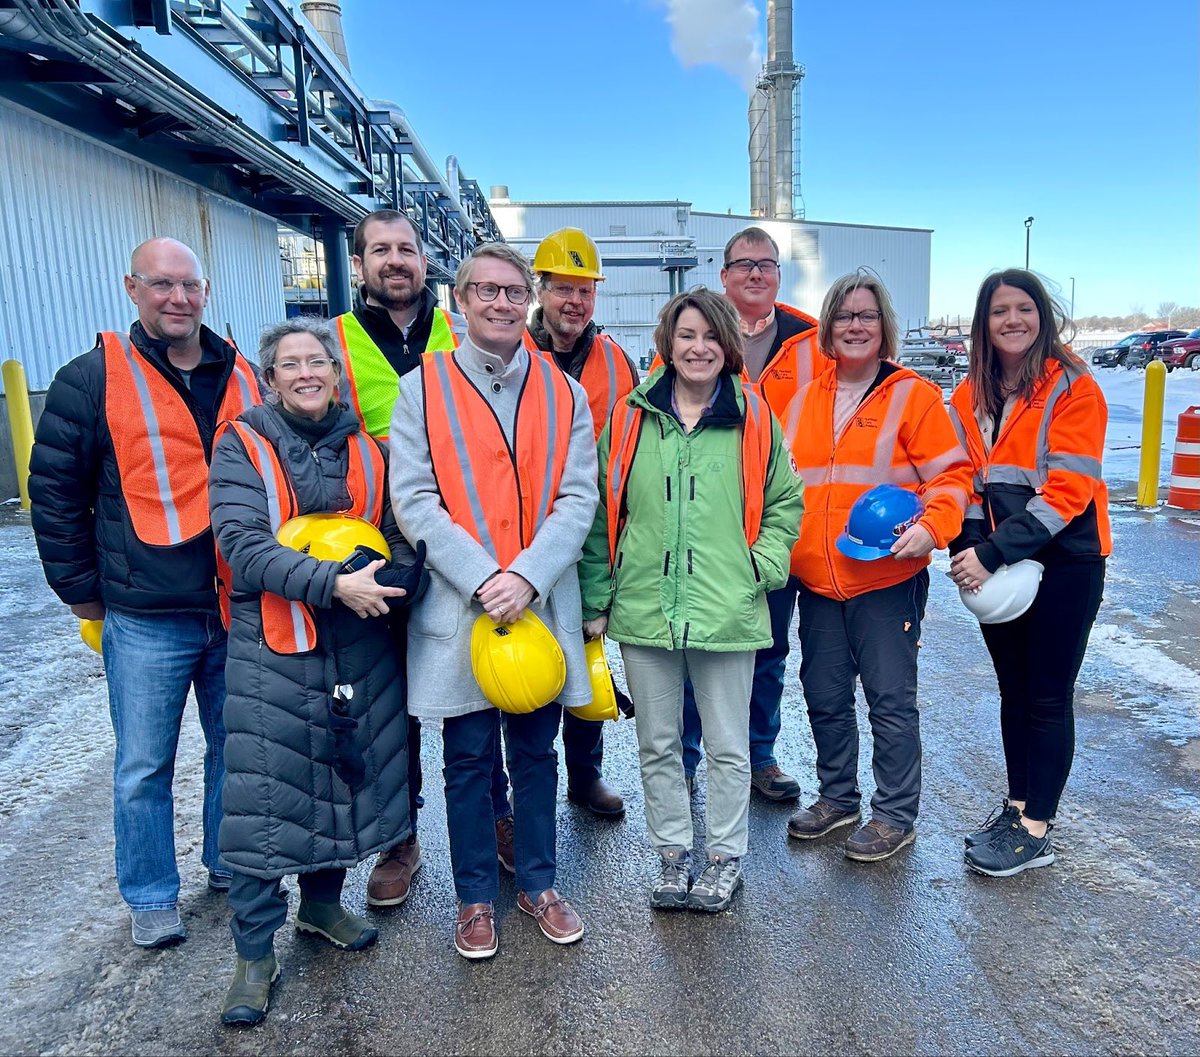 I got to tour the Heartland Corn Products ethanol plant in Winthrop. I’m working to maintain a strong Renewable Fuel Standard and increase access to biodiesel because it decreases our dependency on foreign energy sources and supports Minnesota’s rural economy.